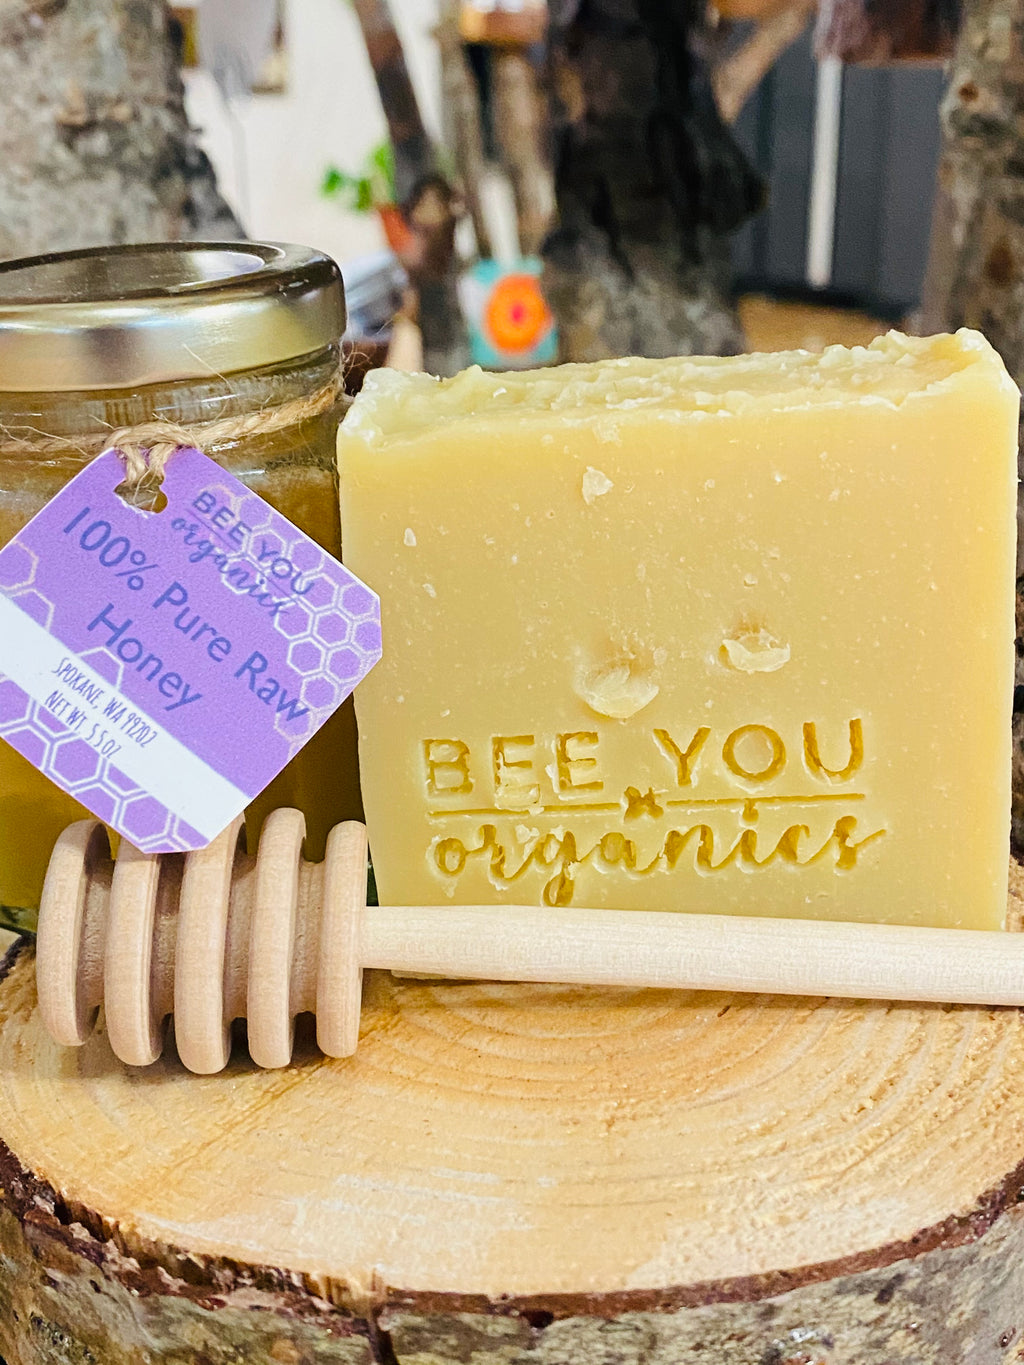 Beeswax & Raw Honey, Skin Care, Bee Smart, Learn About Bees